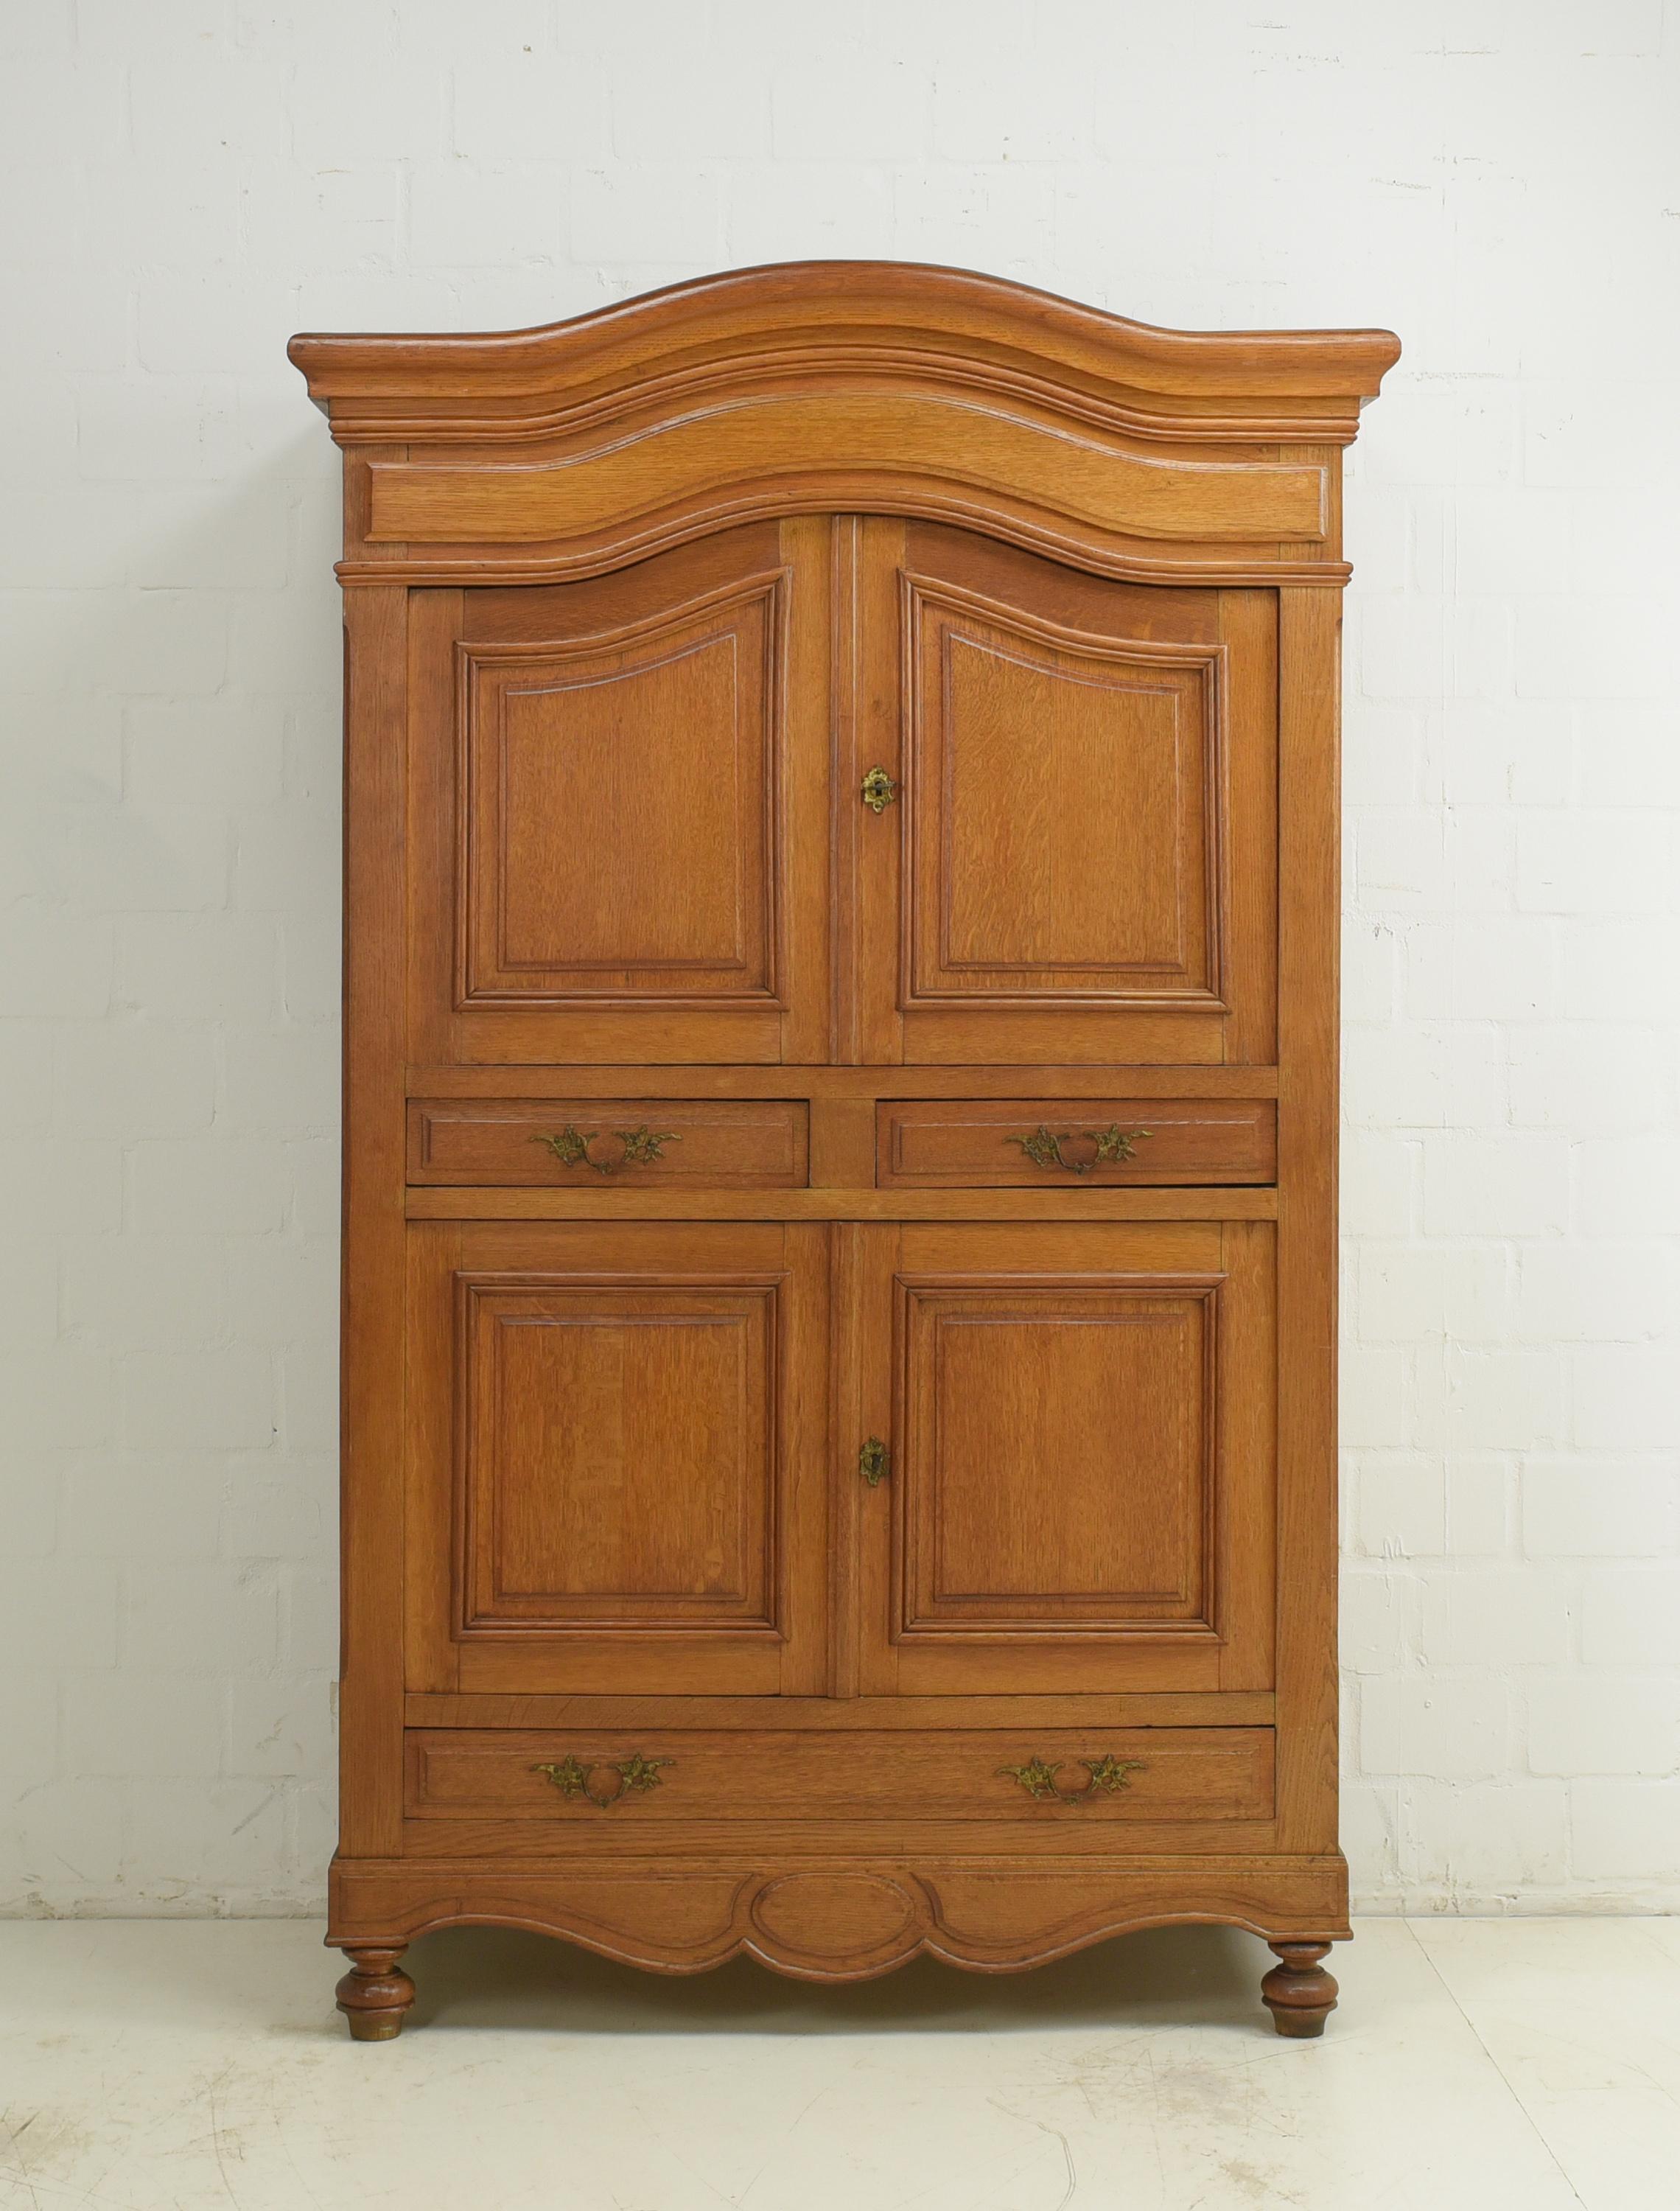 Vertiko restored around 1880 solid oak tall chest of drawers oak cupboard

Features:
Solid oak body, solid softwood inside
Four doors and three drawers
Practical division
Original fittings
Attractive, quite light color tone
Extraordinary